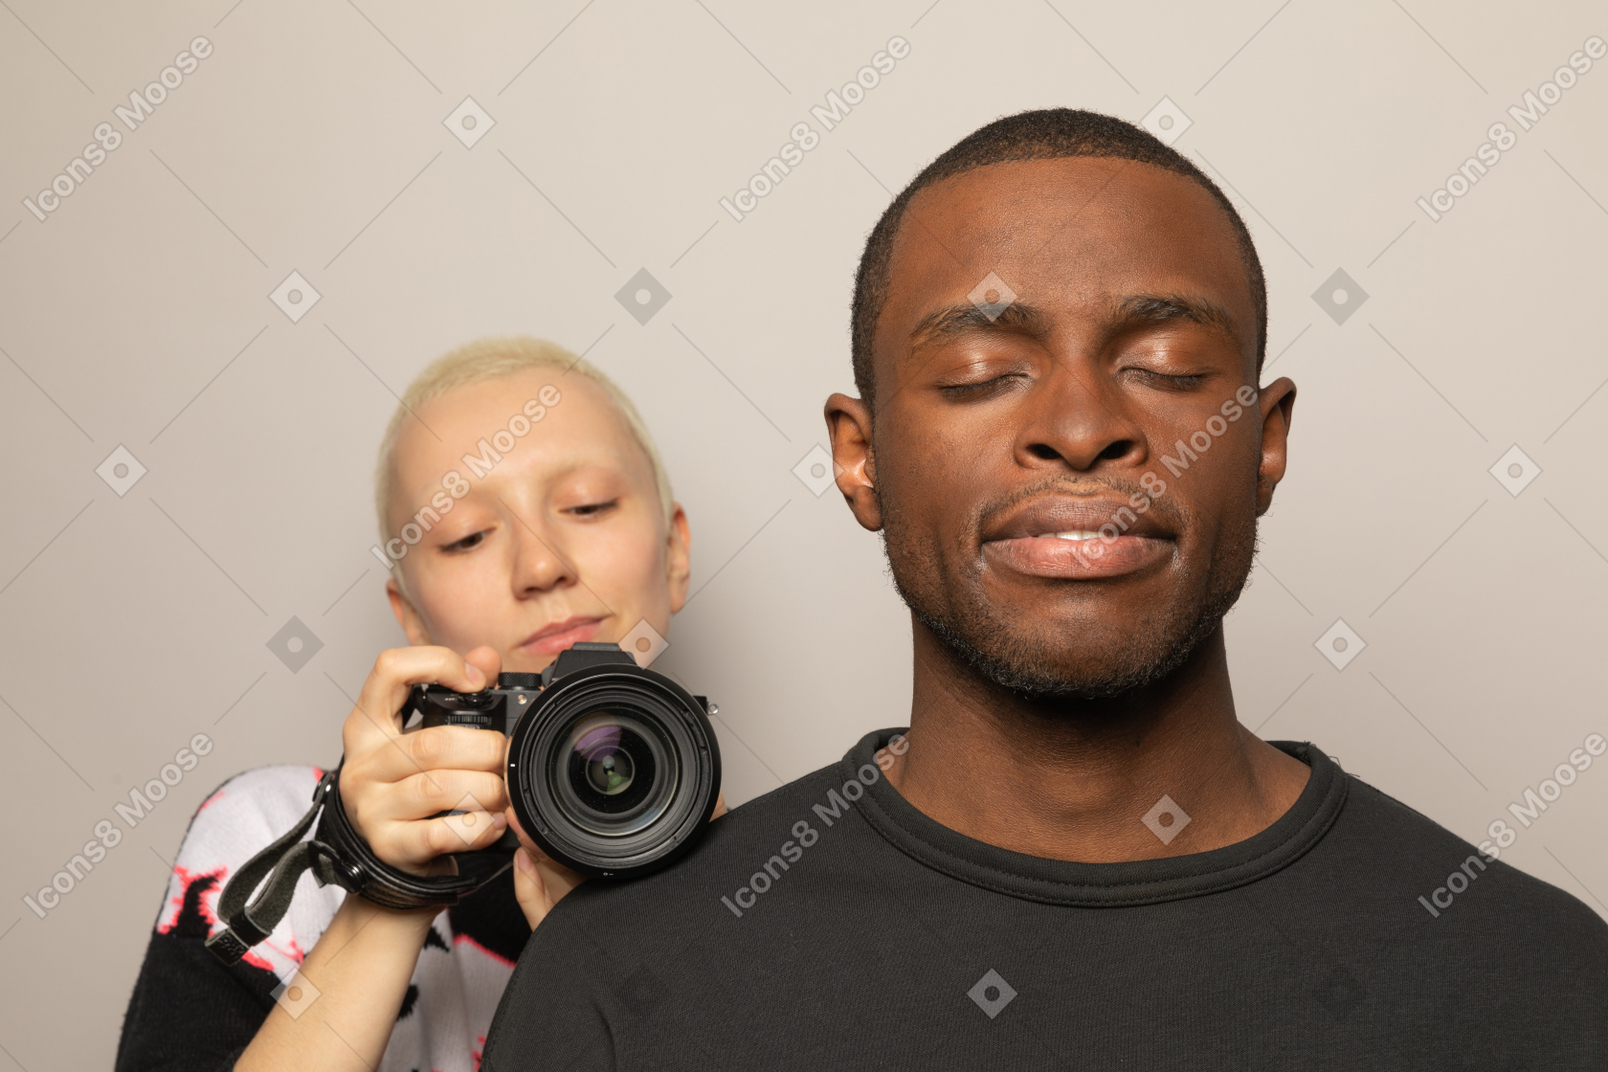 Woman with a camera shooting a man